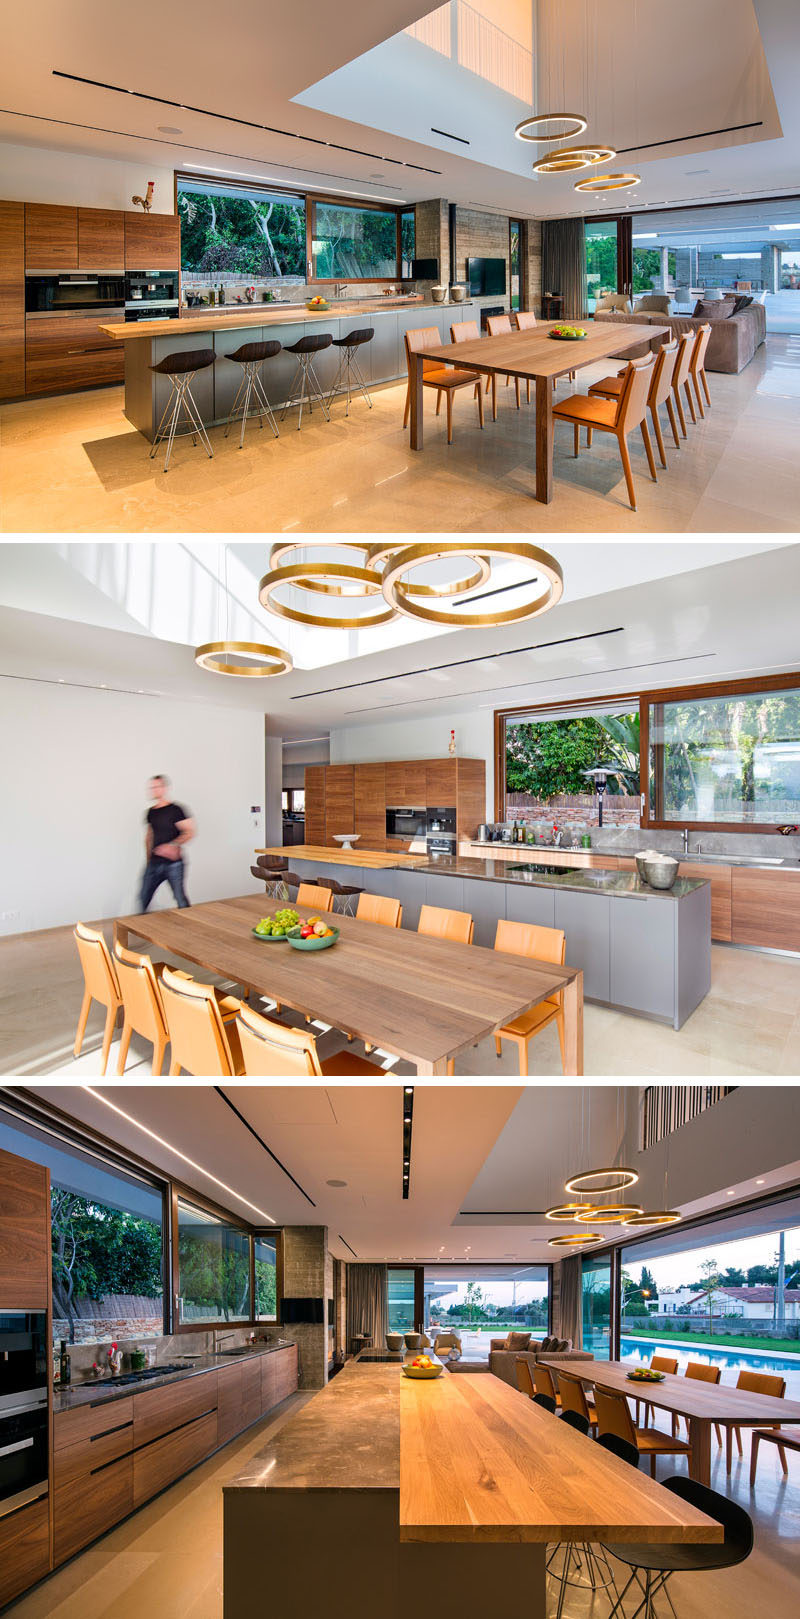 A void in the ceiling with circular pendant lights helps to anchor the dining table in the open plan room. Behind the dining area is the kitchen with a large grey island with a wood bar for sitting at. Wood cabinets line the wall and a large sliding window looks out onto the garden.